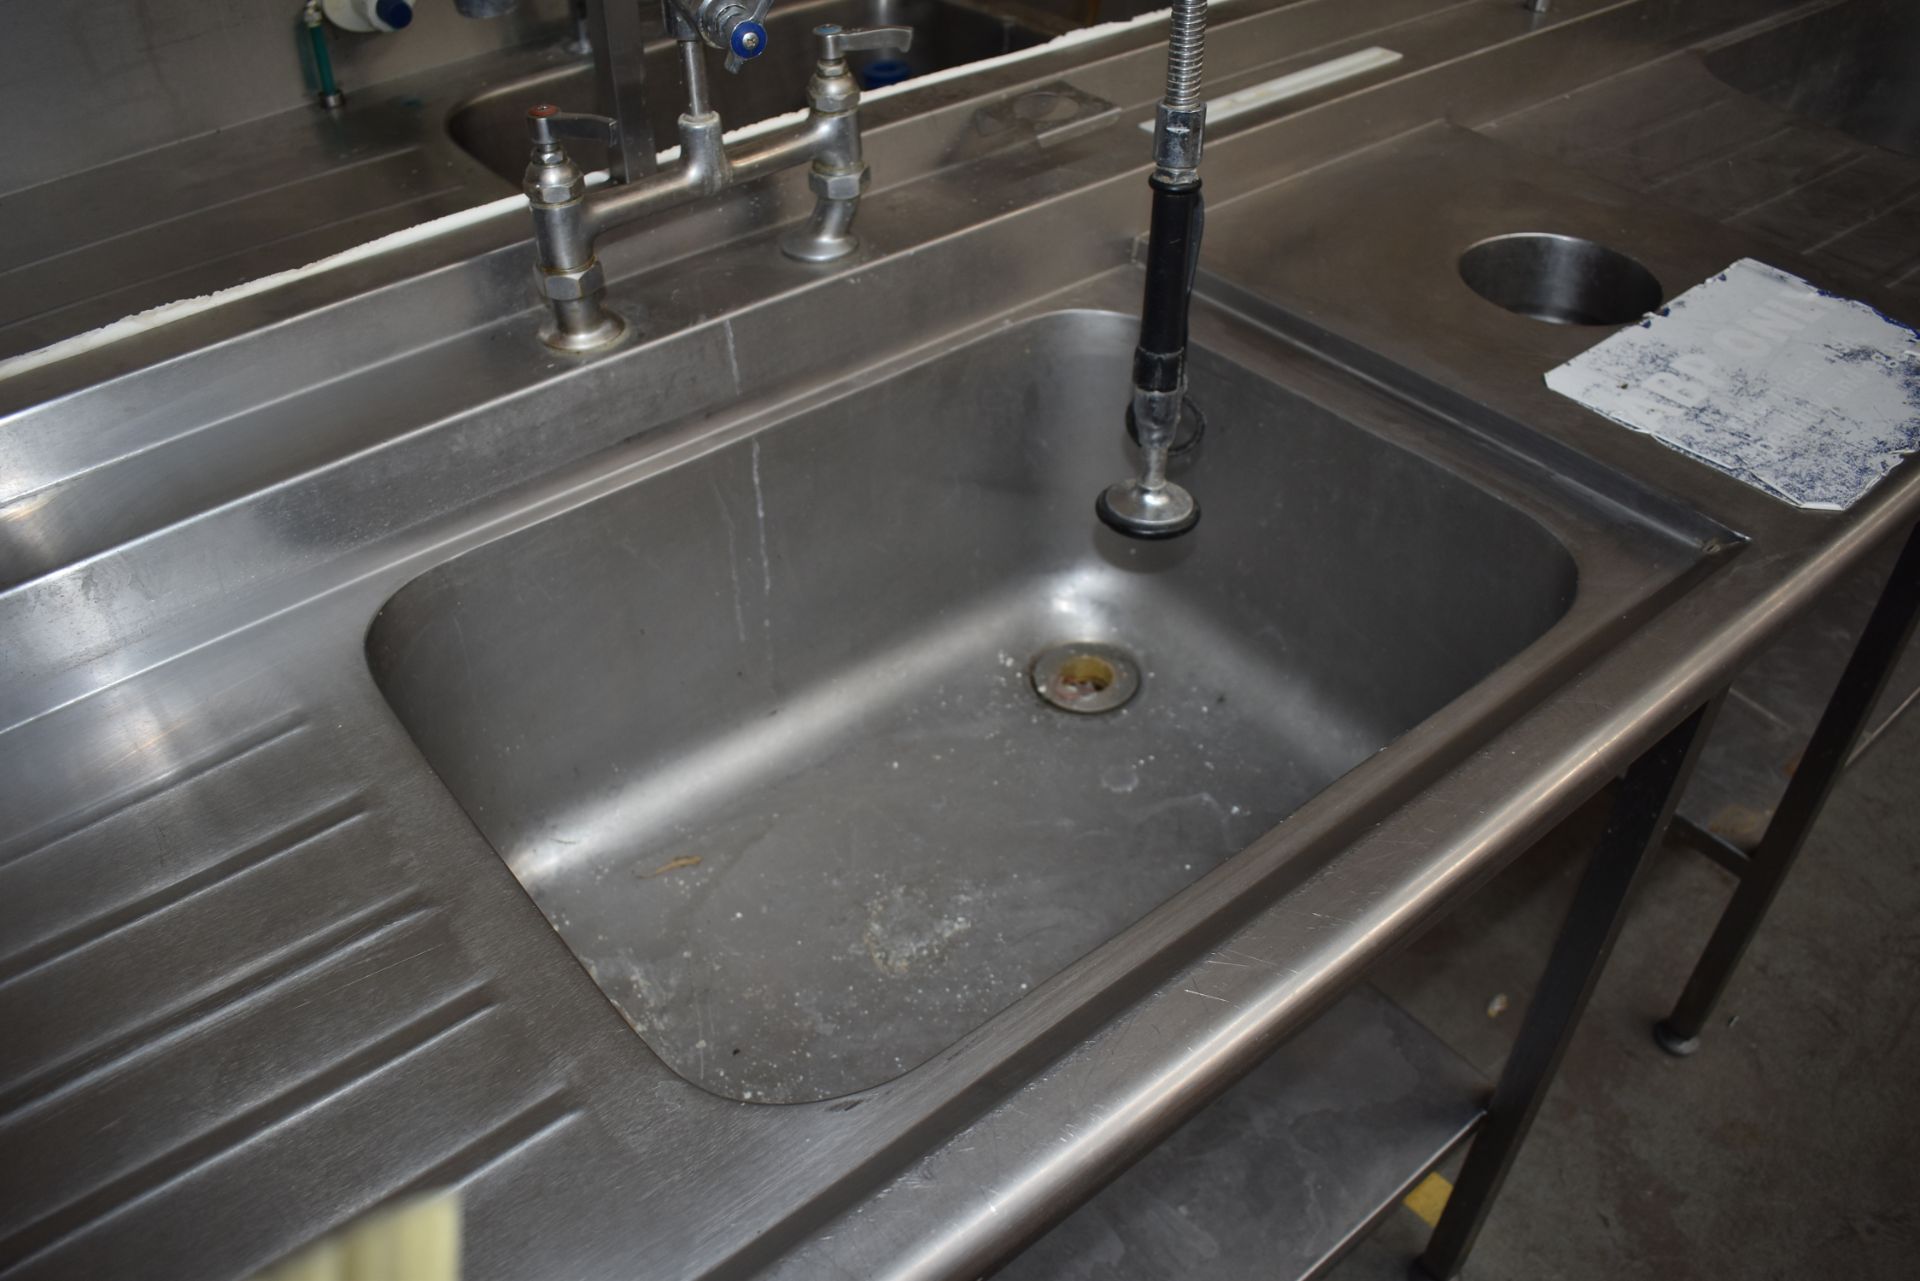 1 x Stainless Steel Commercial Wash Basin Unit With Twin Sink Bowl and Drainers, Mixer Taps, Spray H - Image 7 of 12